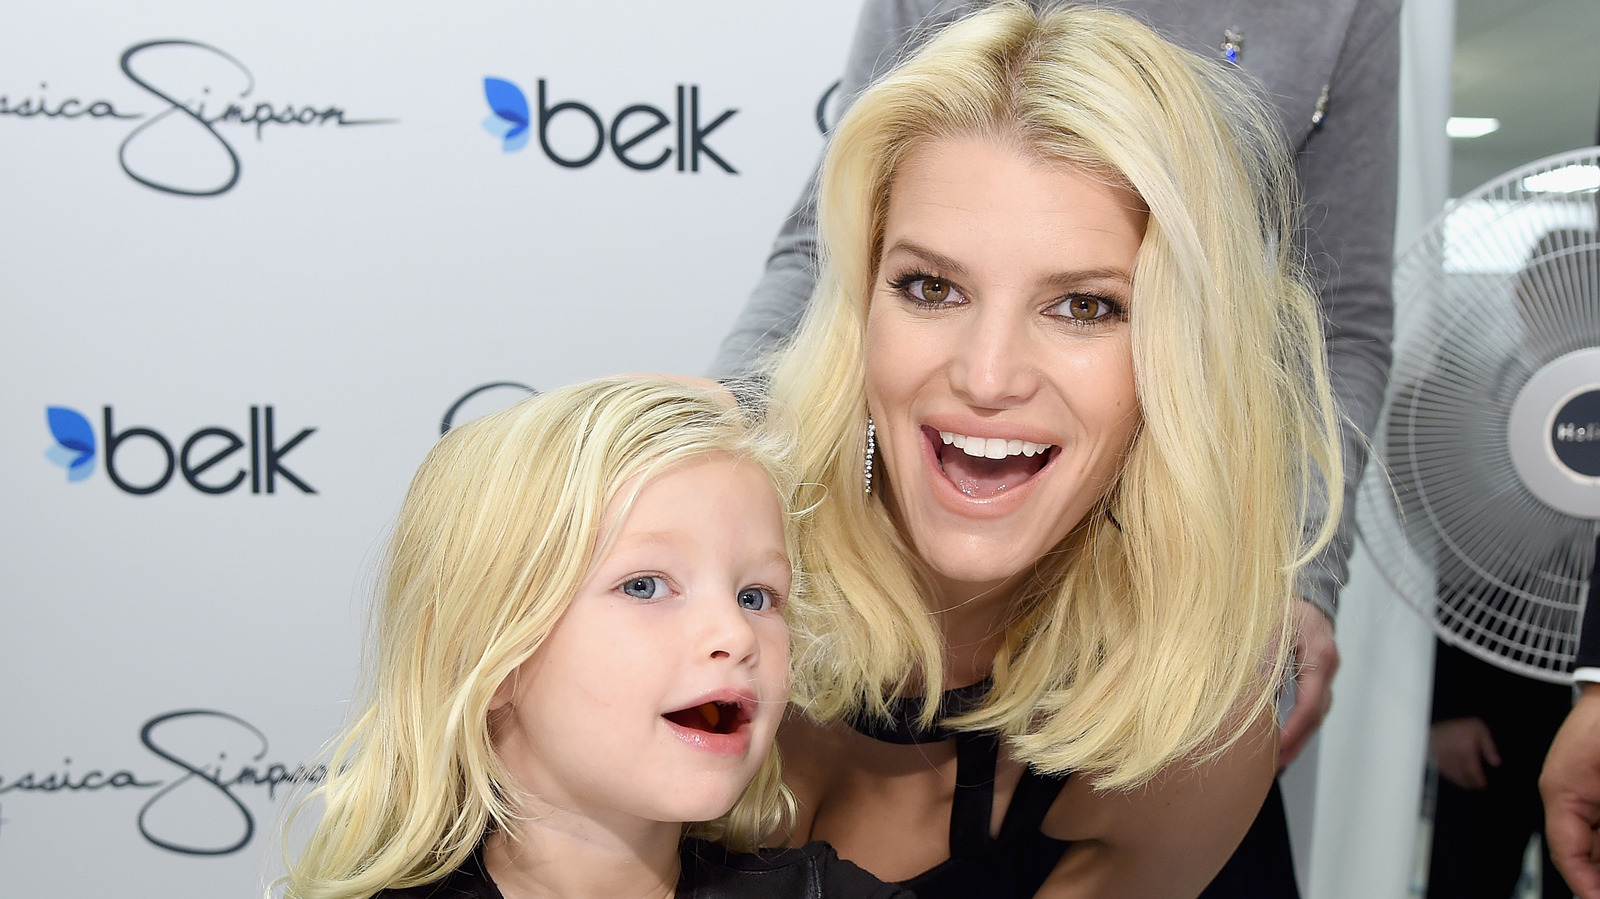 Jessica Simpson's Husband and 3 Kids Join Her at Fashion Launch Event